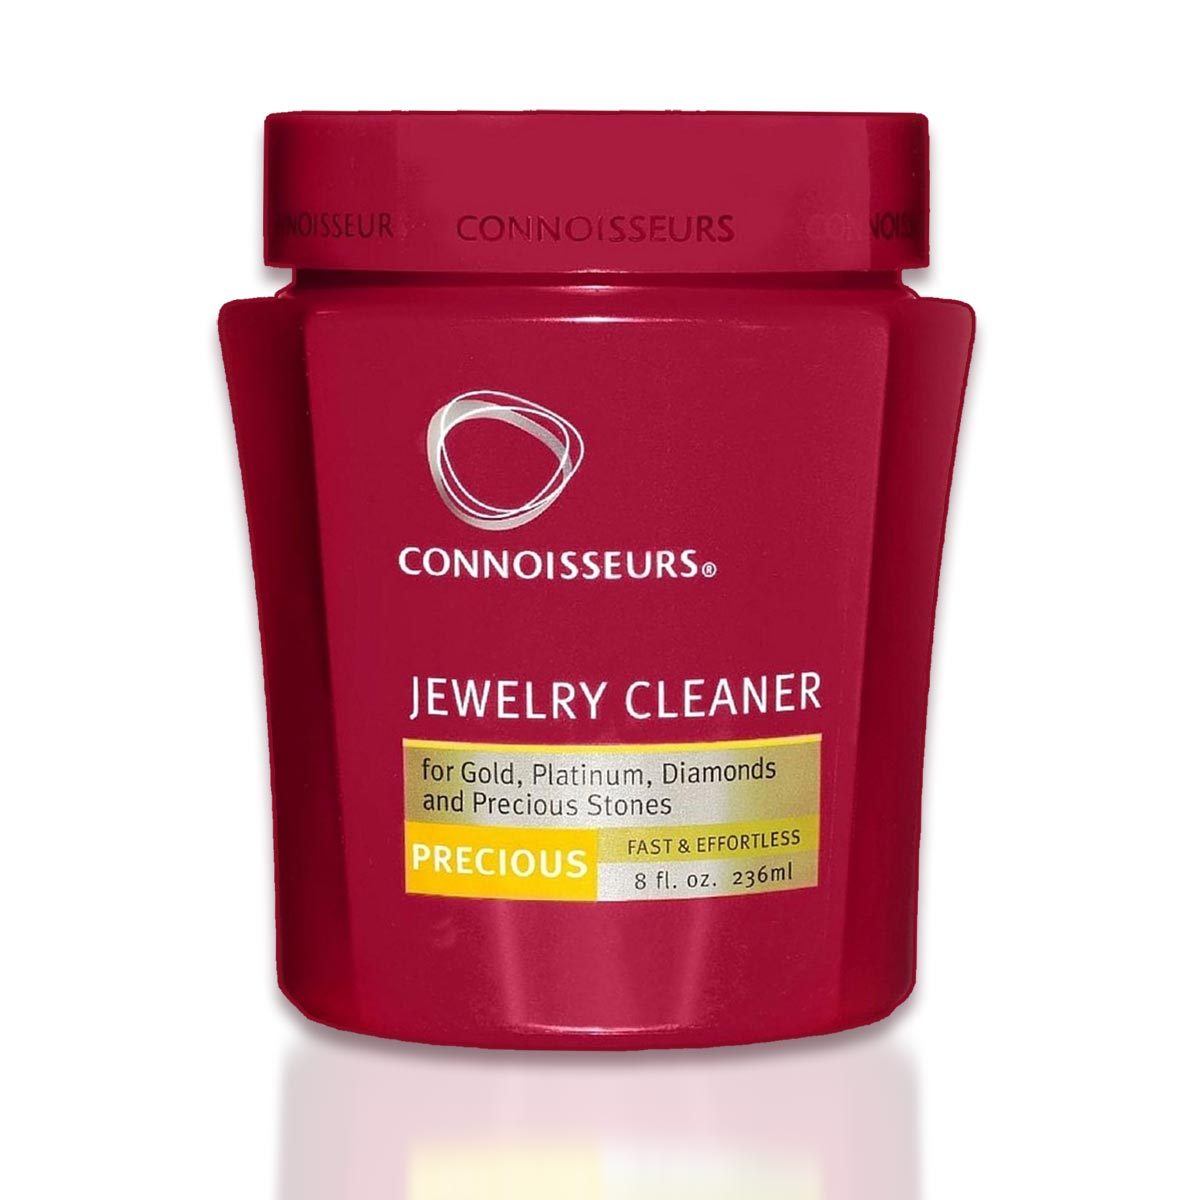 Connoisseurs Jewelry Cleaner Review: My Pieces Look Brand New